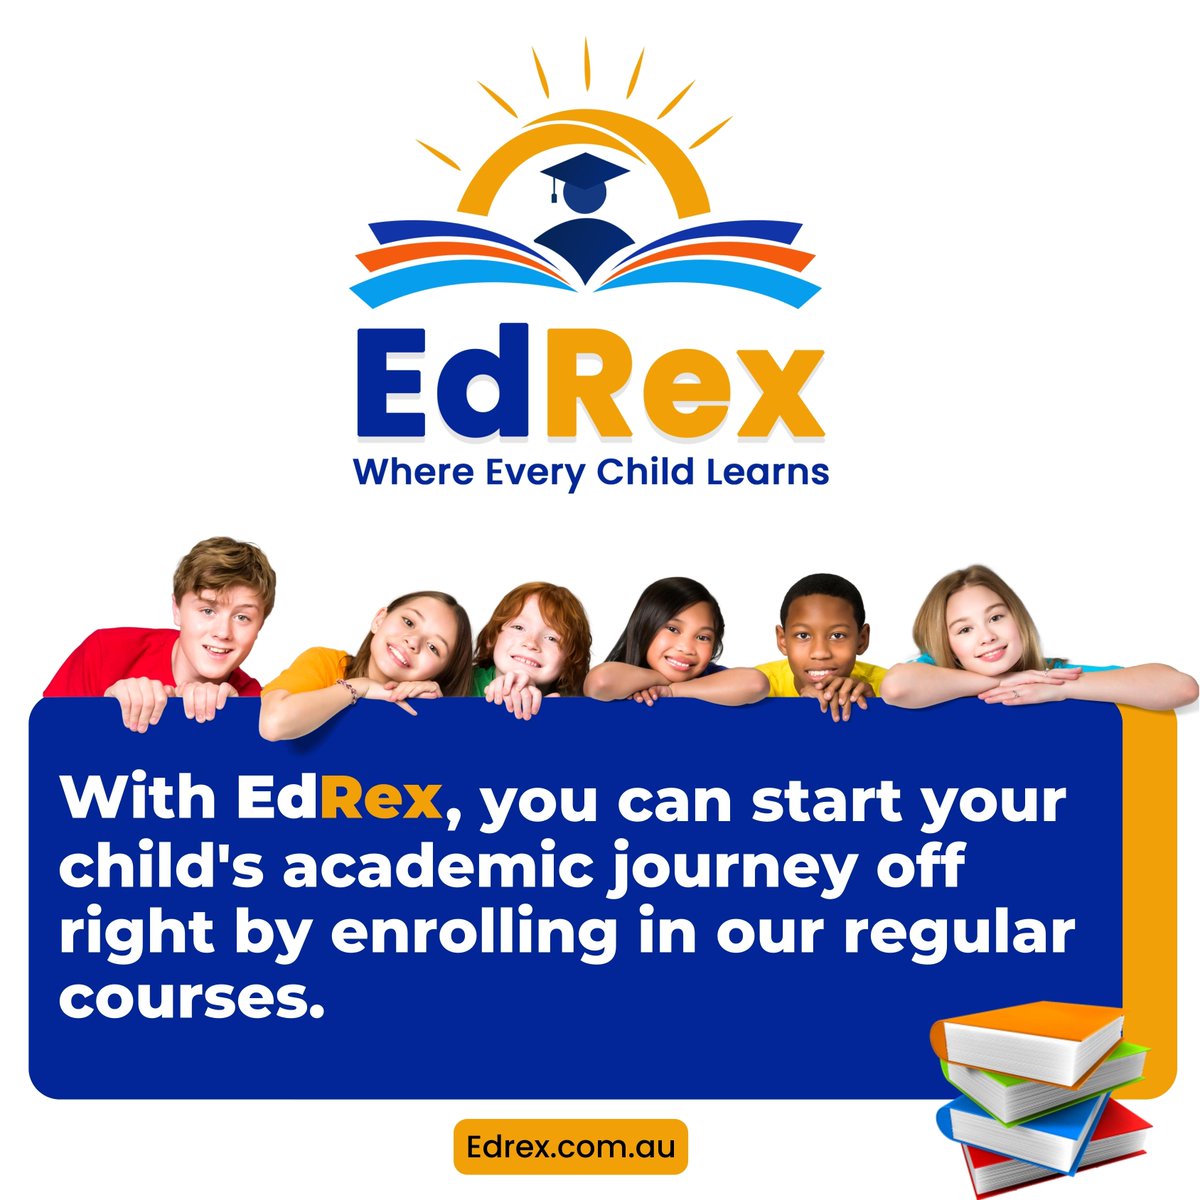 🚀With EdRex Start Your Child's Online Tutoring Journey with :

⭕ Flexibility
⭕Convenience
⭕Individualized attention
⭕Access to a wider range of tutors
⭕Improved academic performance

#onlinetutor #onlinetutoring #Australia #sydney #kids #onlinetution